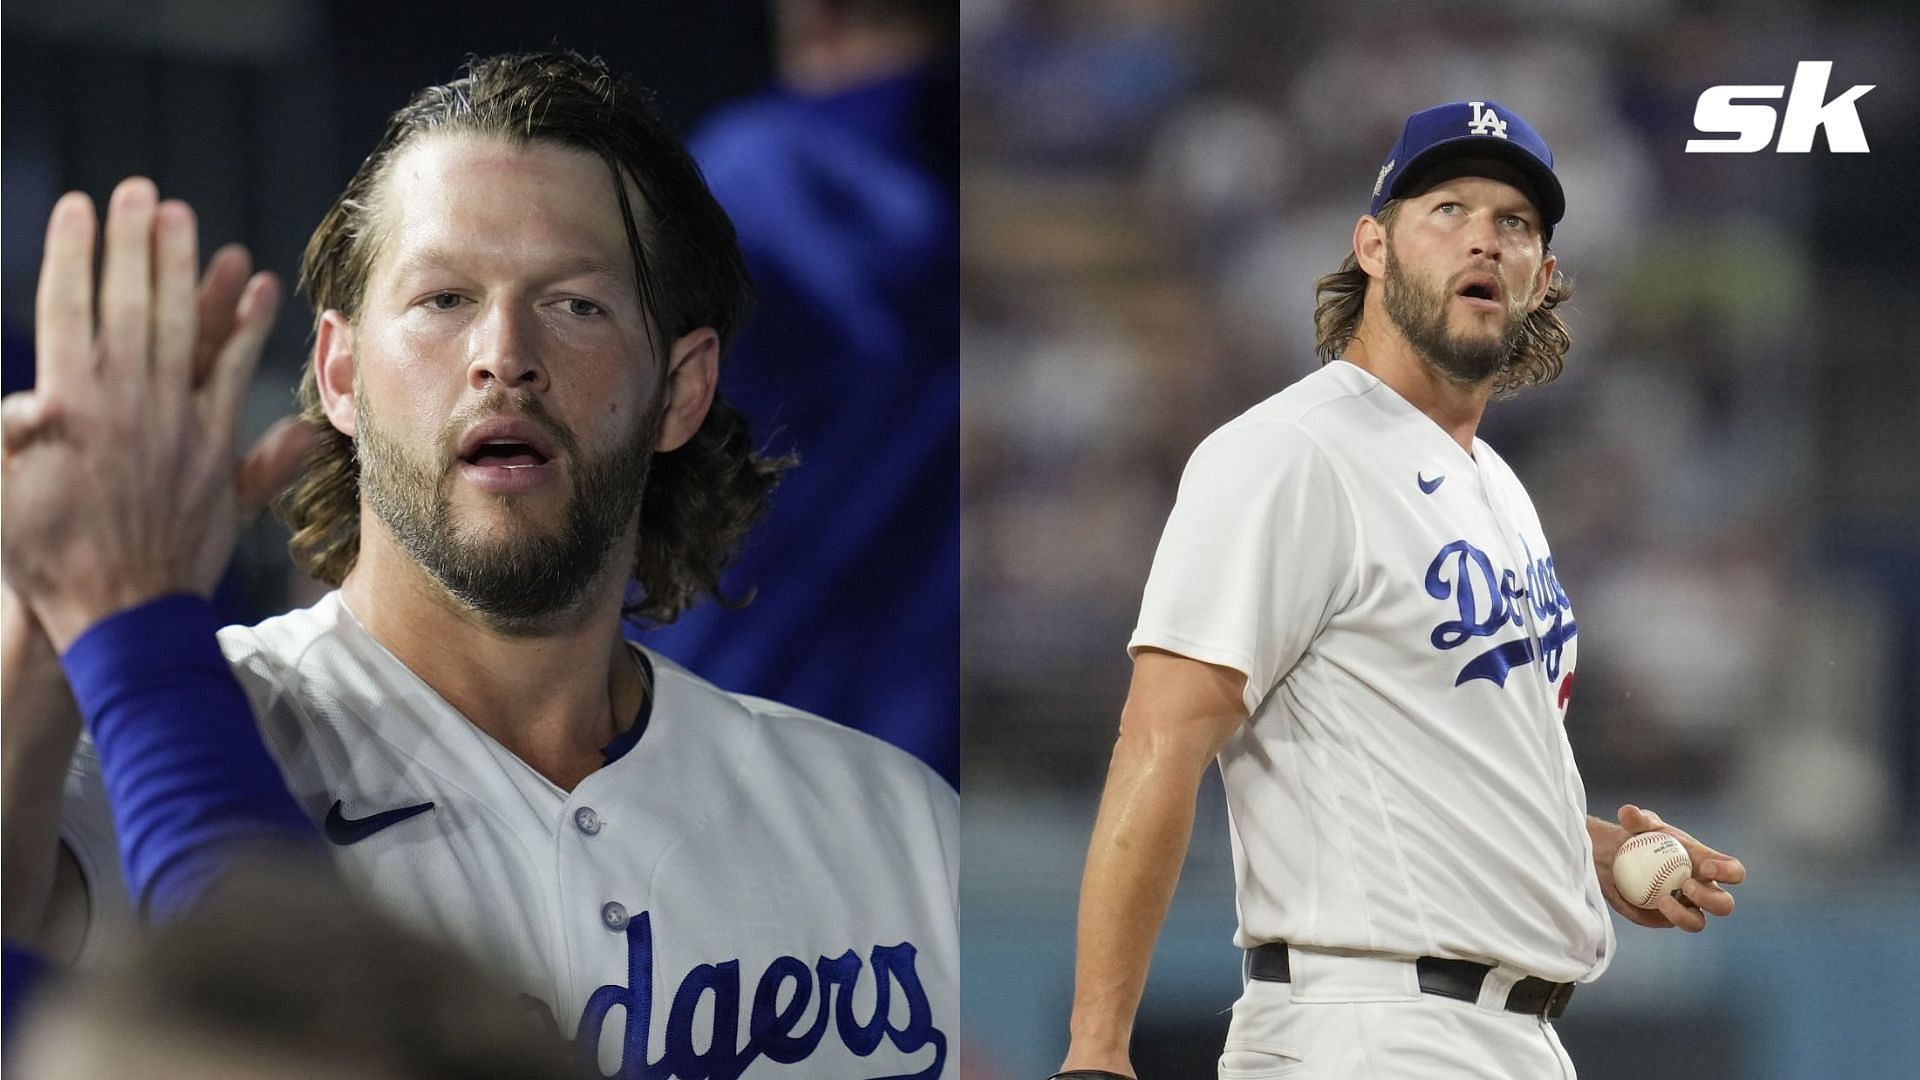 Clayton Kershaw has undergone success surgery to repair his left shoulder, hopes to be ready by next summer